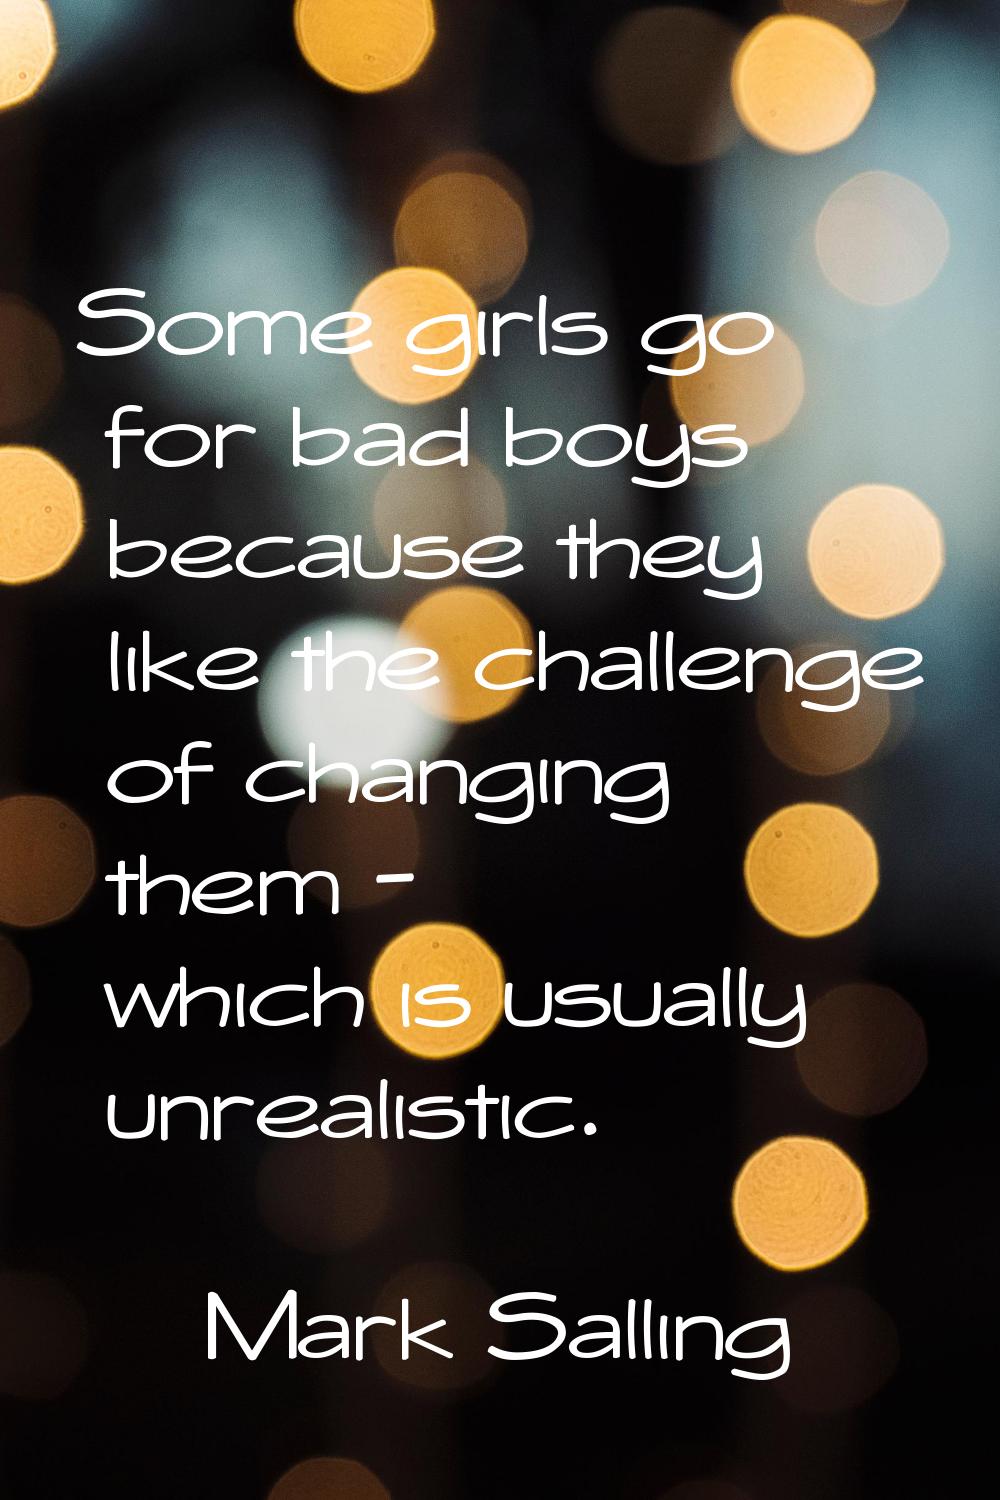 Some girls go for bad boys because they like the challenge of changing them - which is usually unre